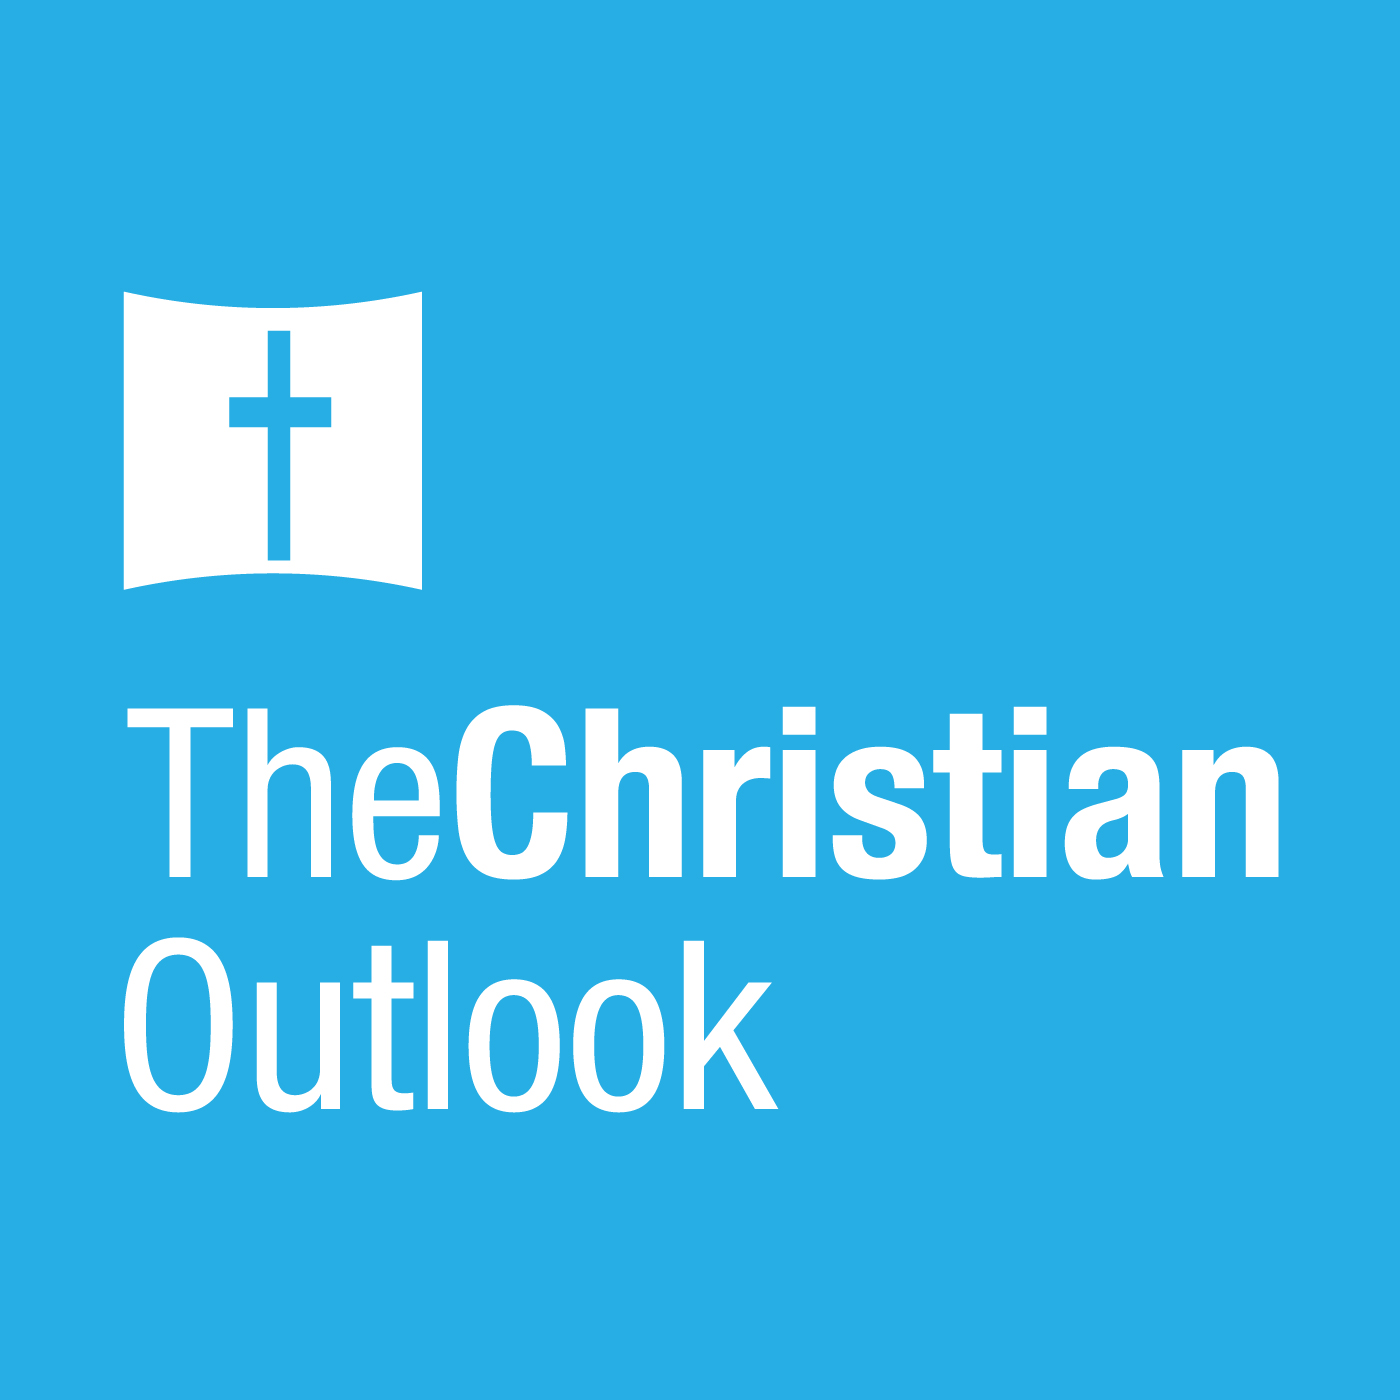 TCO 6/21/14: Christians Face Persecution as Iraq Burns